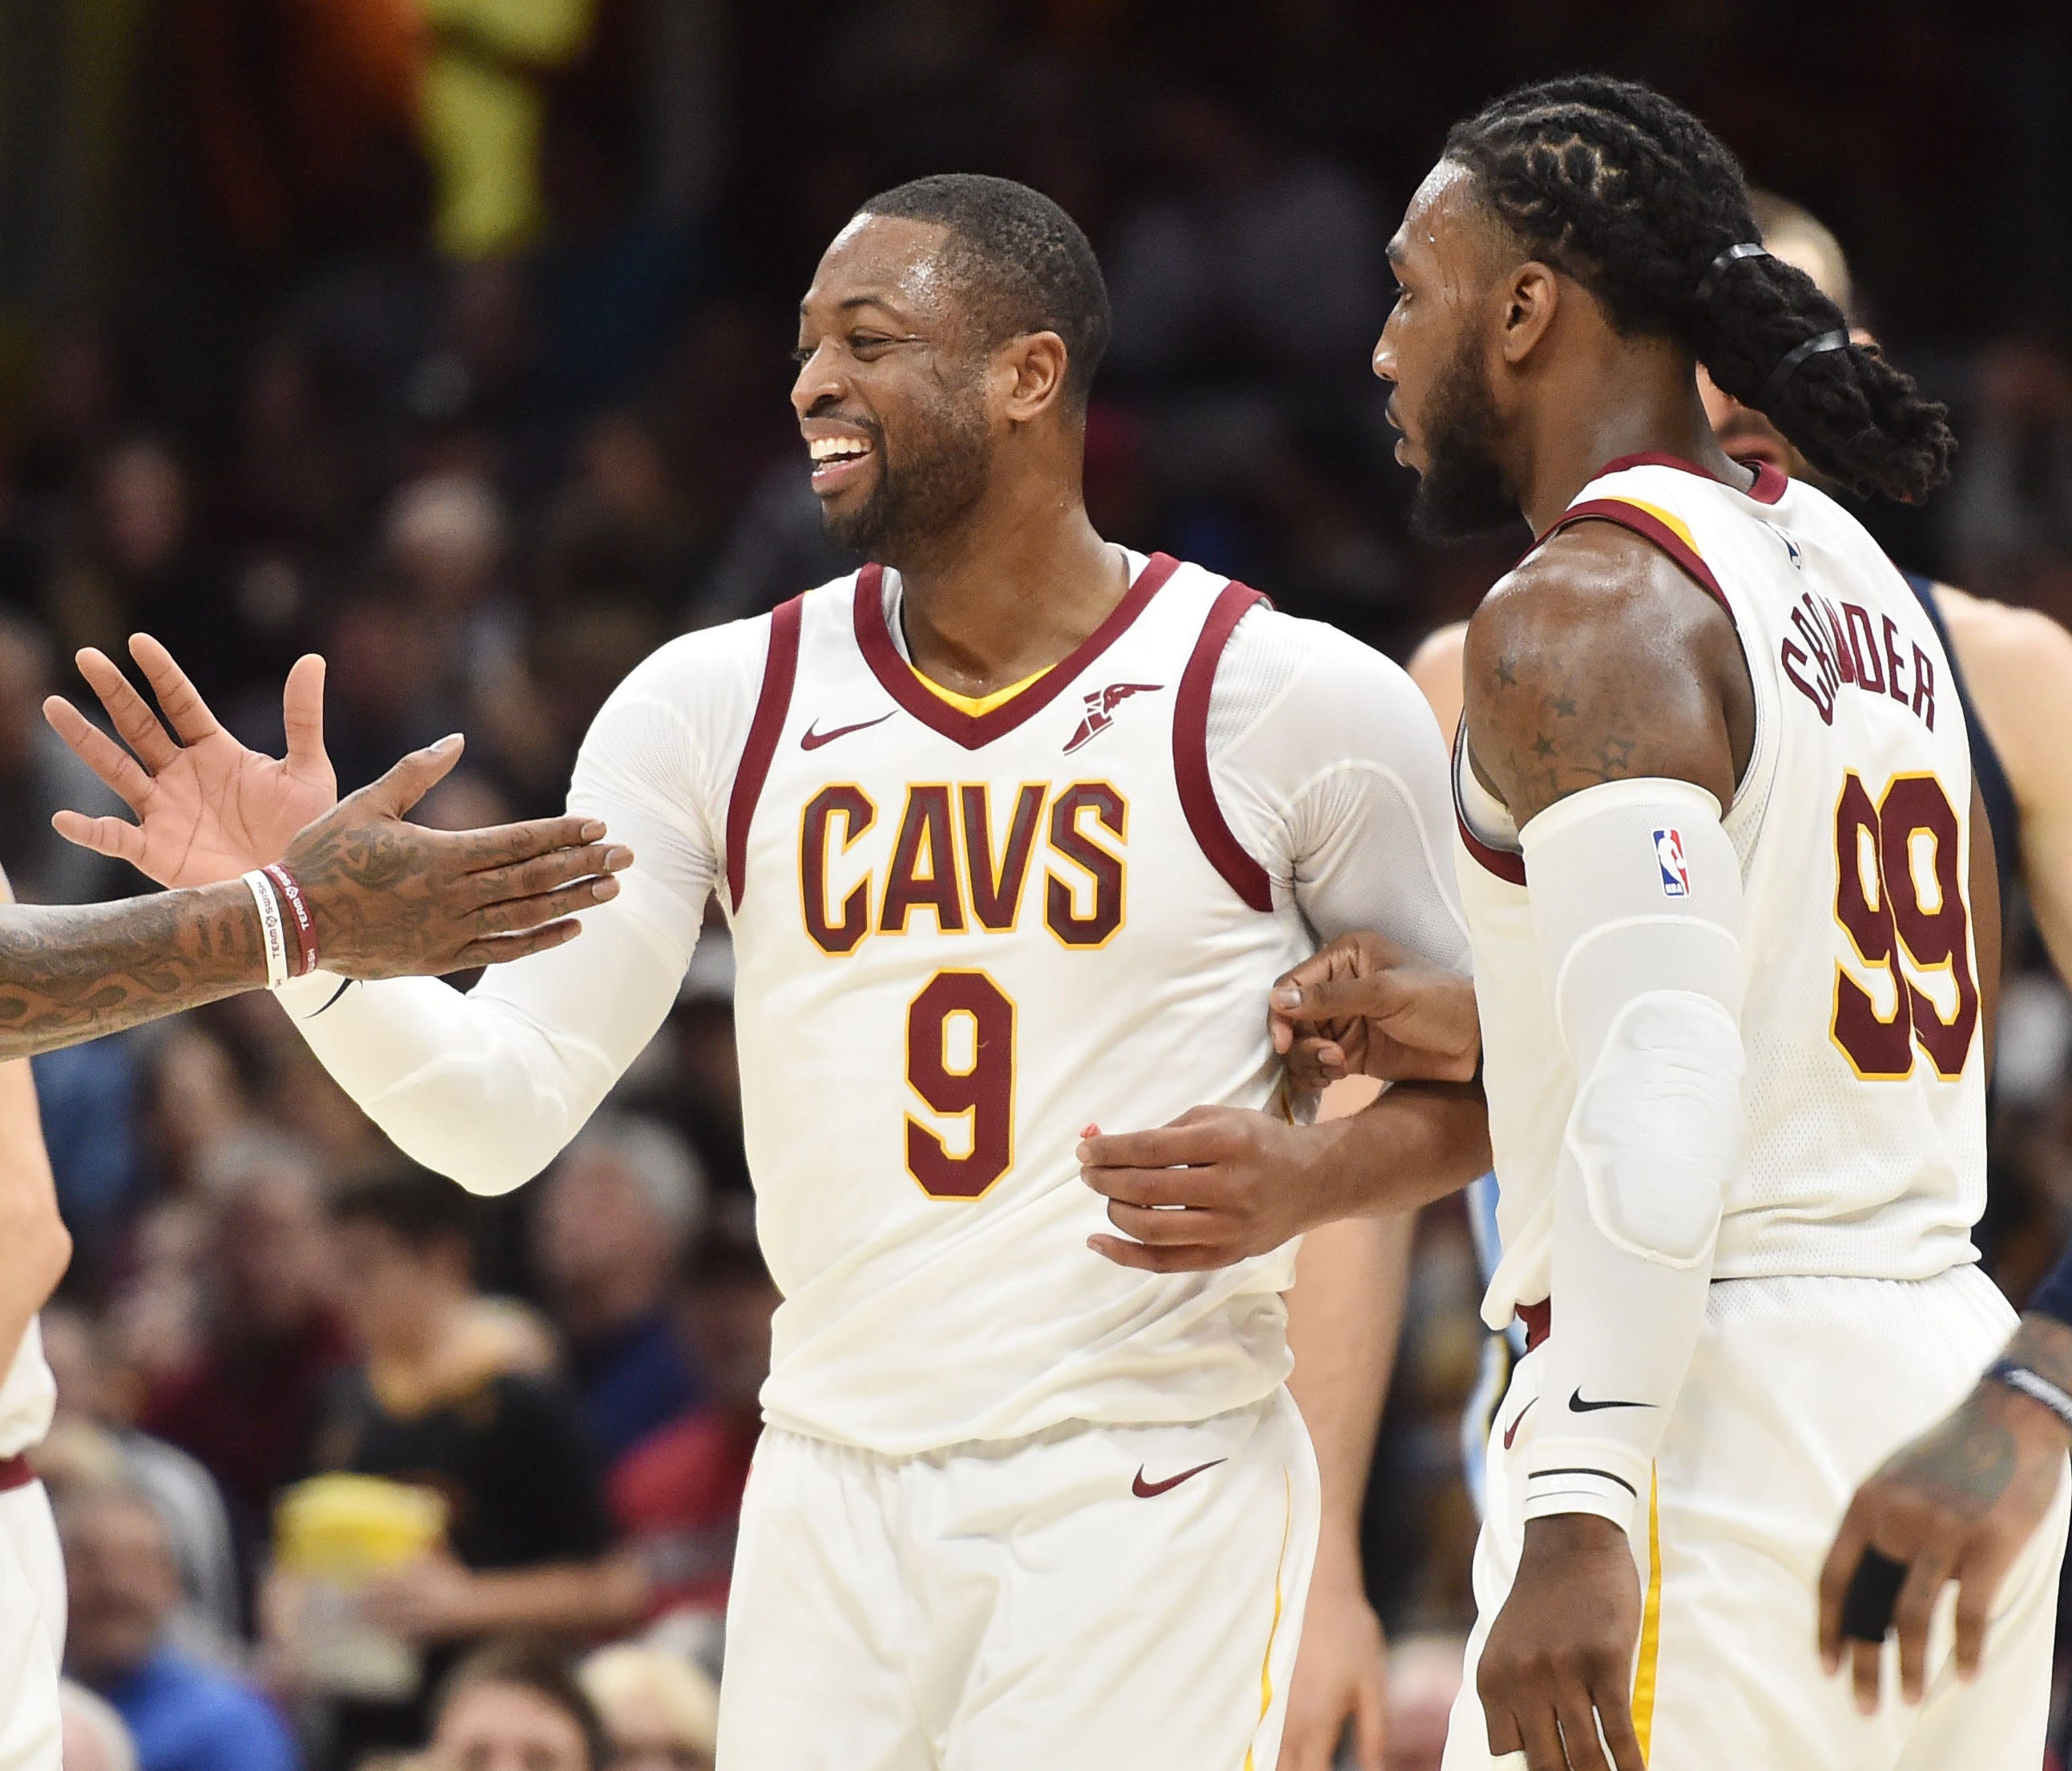 Cleveland Cavaliers guard Dwyane Wade (9) and guard JR Smith (5) celebrate during the second half against the Memphis Grizzlies at Quicken Loans Arena.